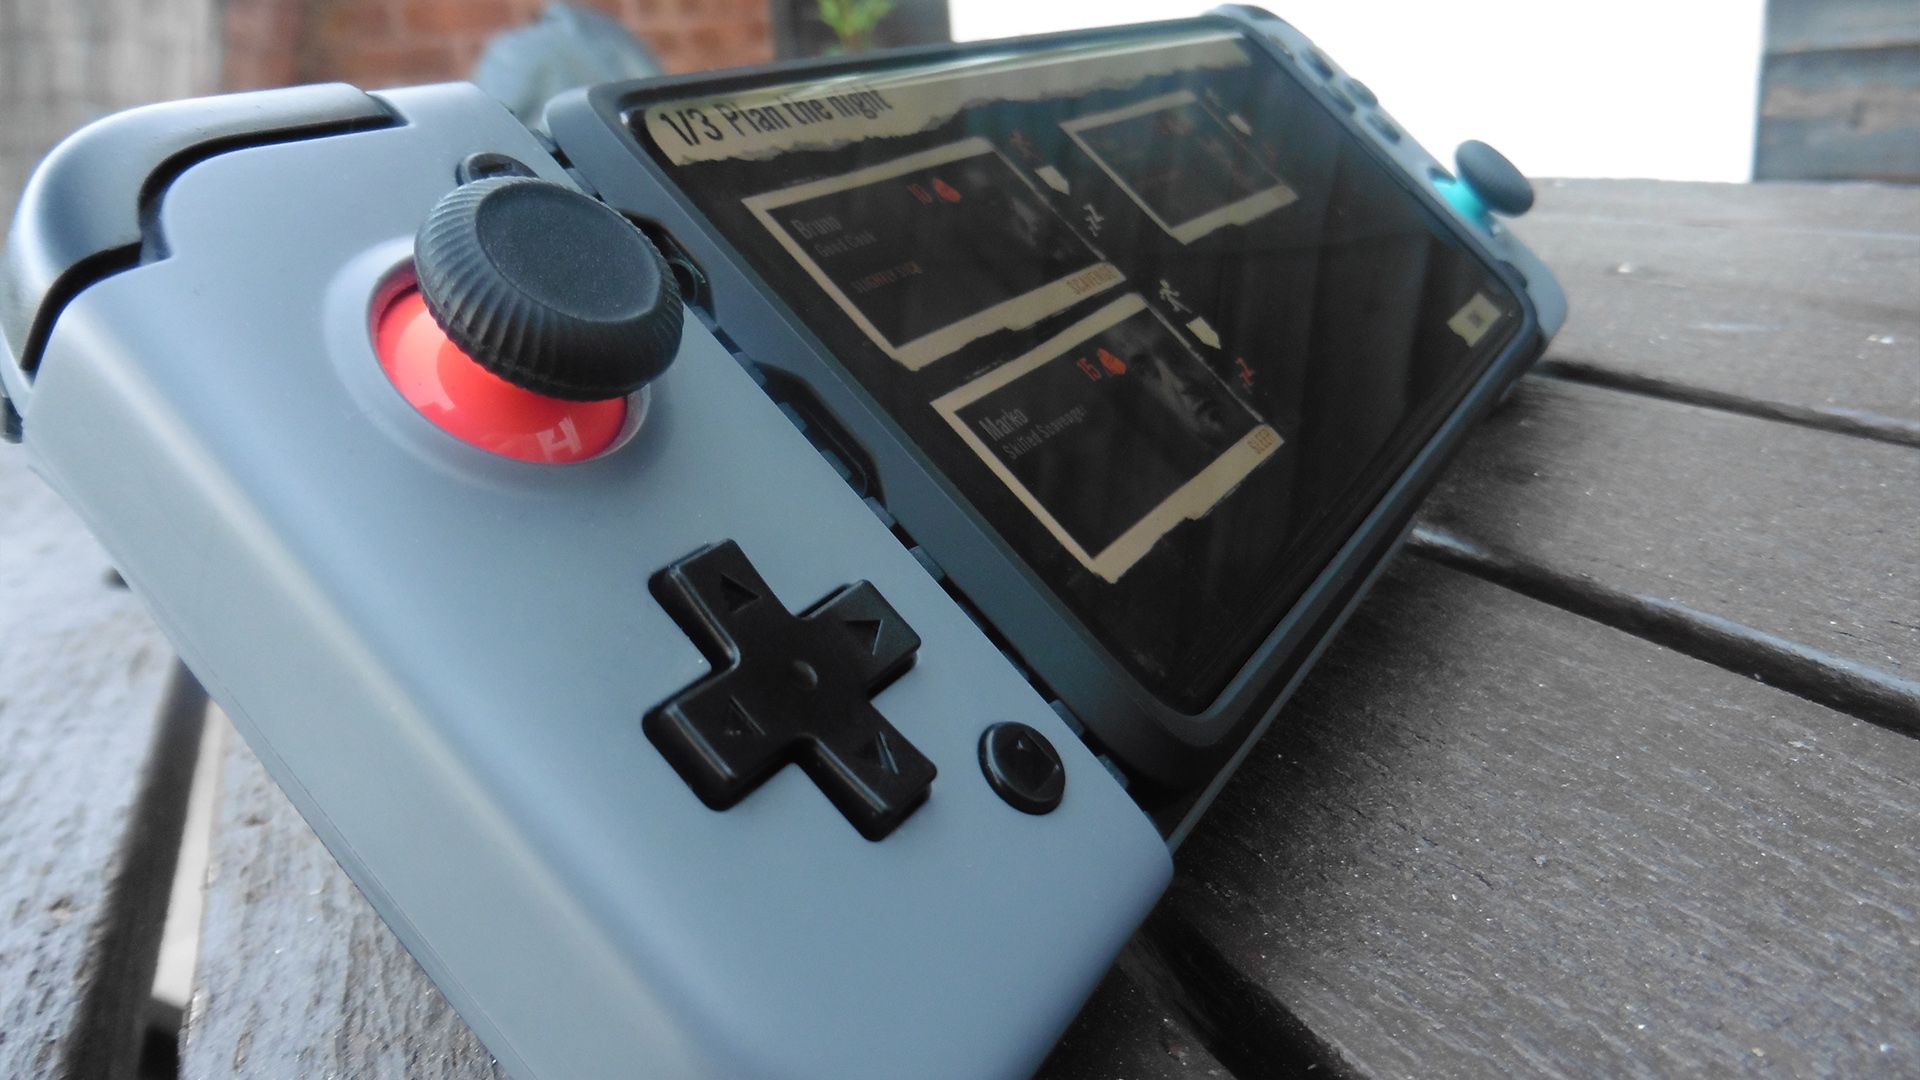 GameSir X2 review: A great mobile Bluetooth game controller that fits most  phones